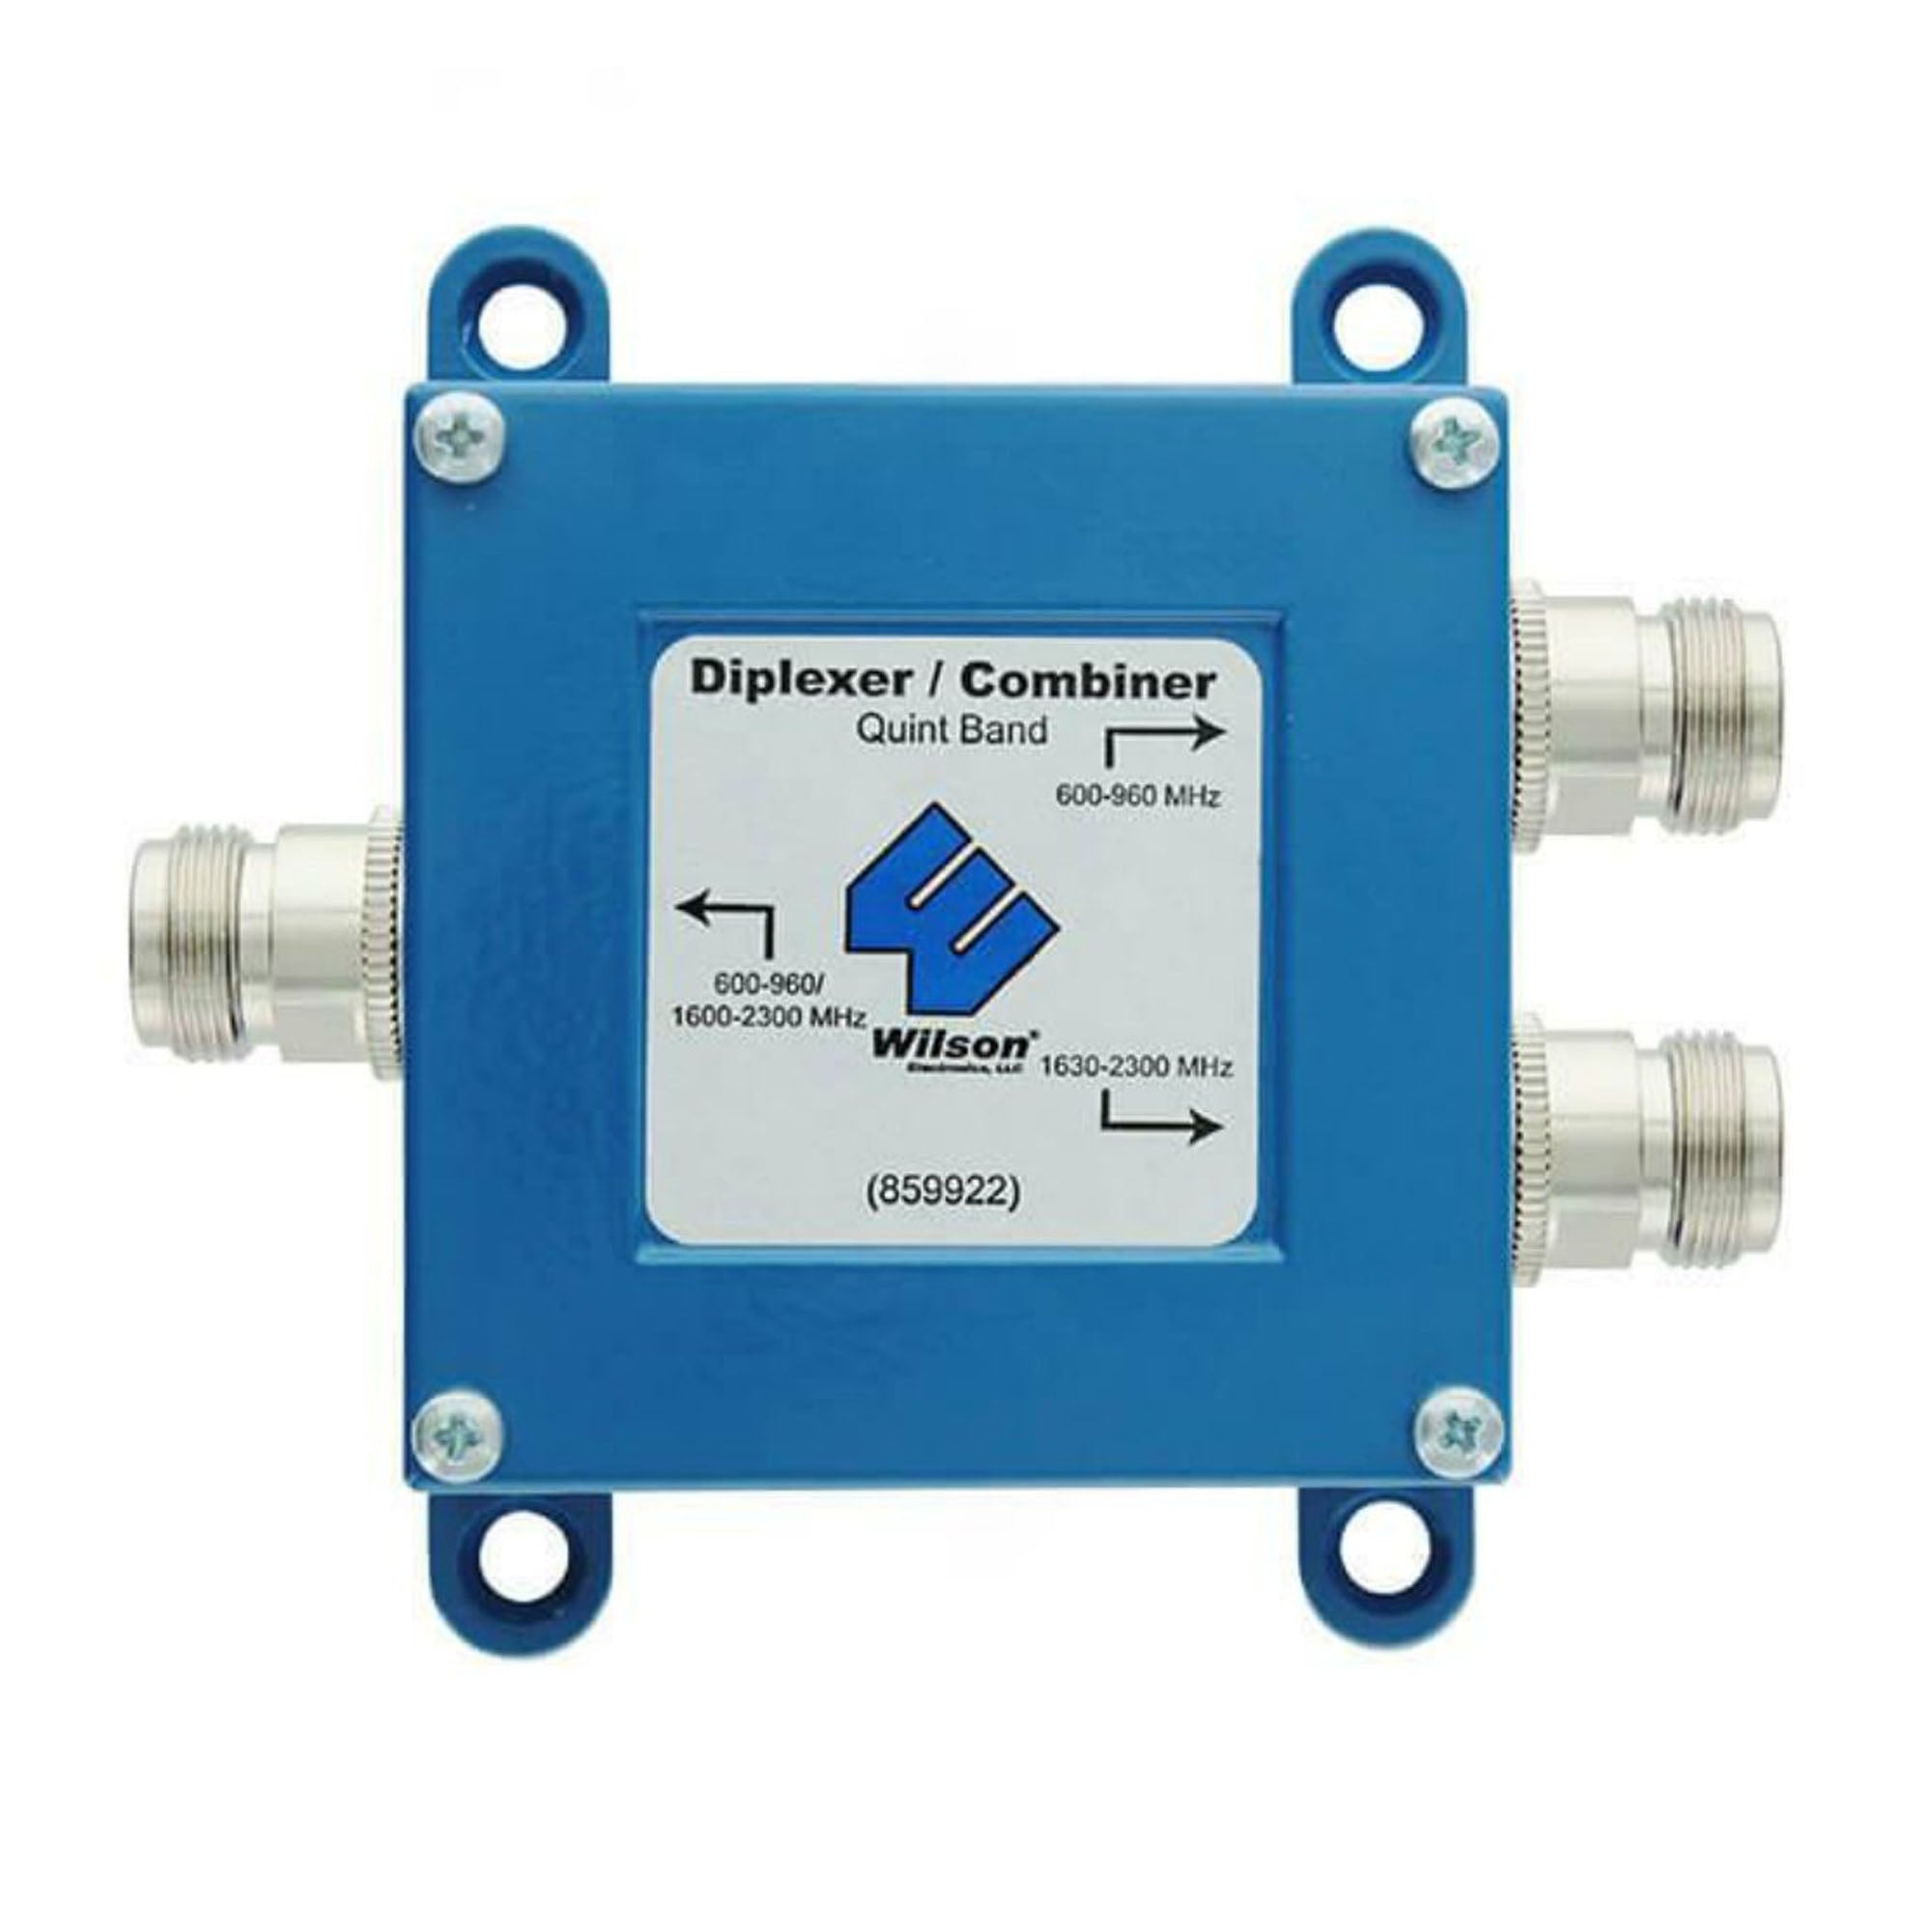 Wilson dual band diplexer/combiner (800-900mhz/1850-1990 mhz bands)